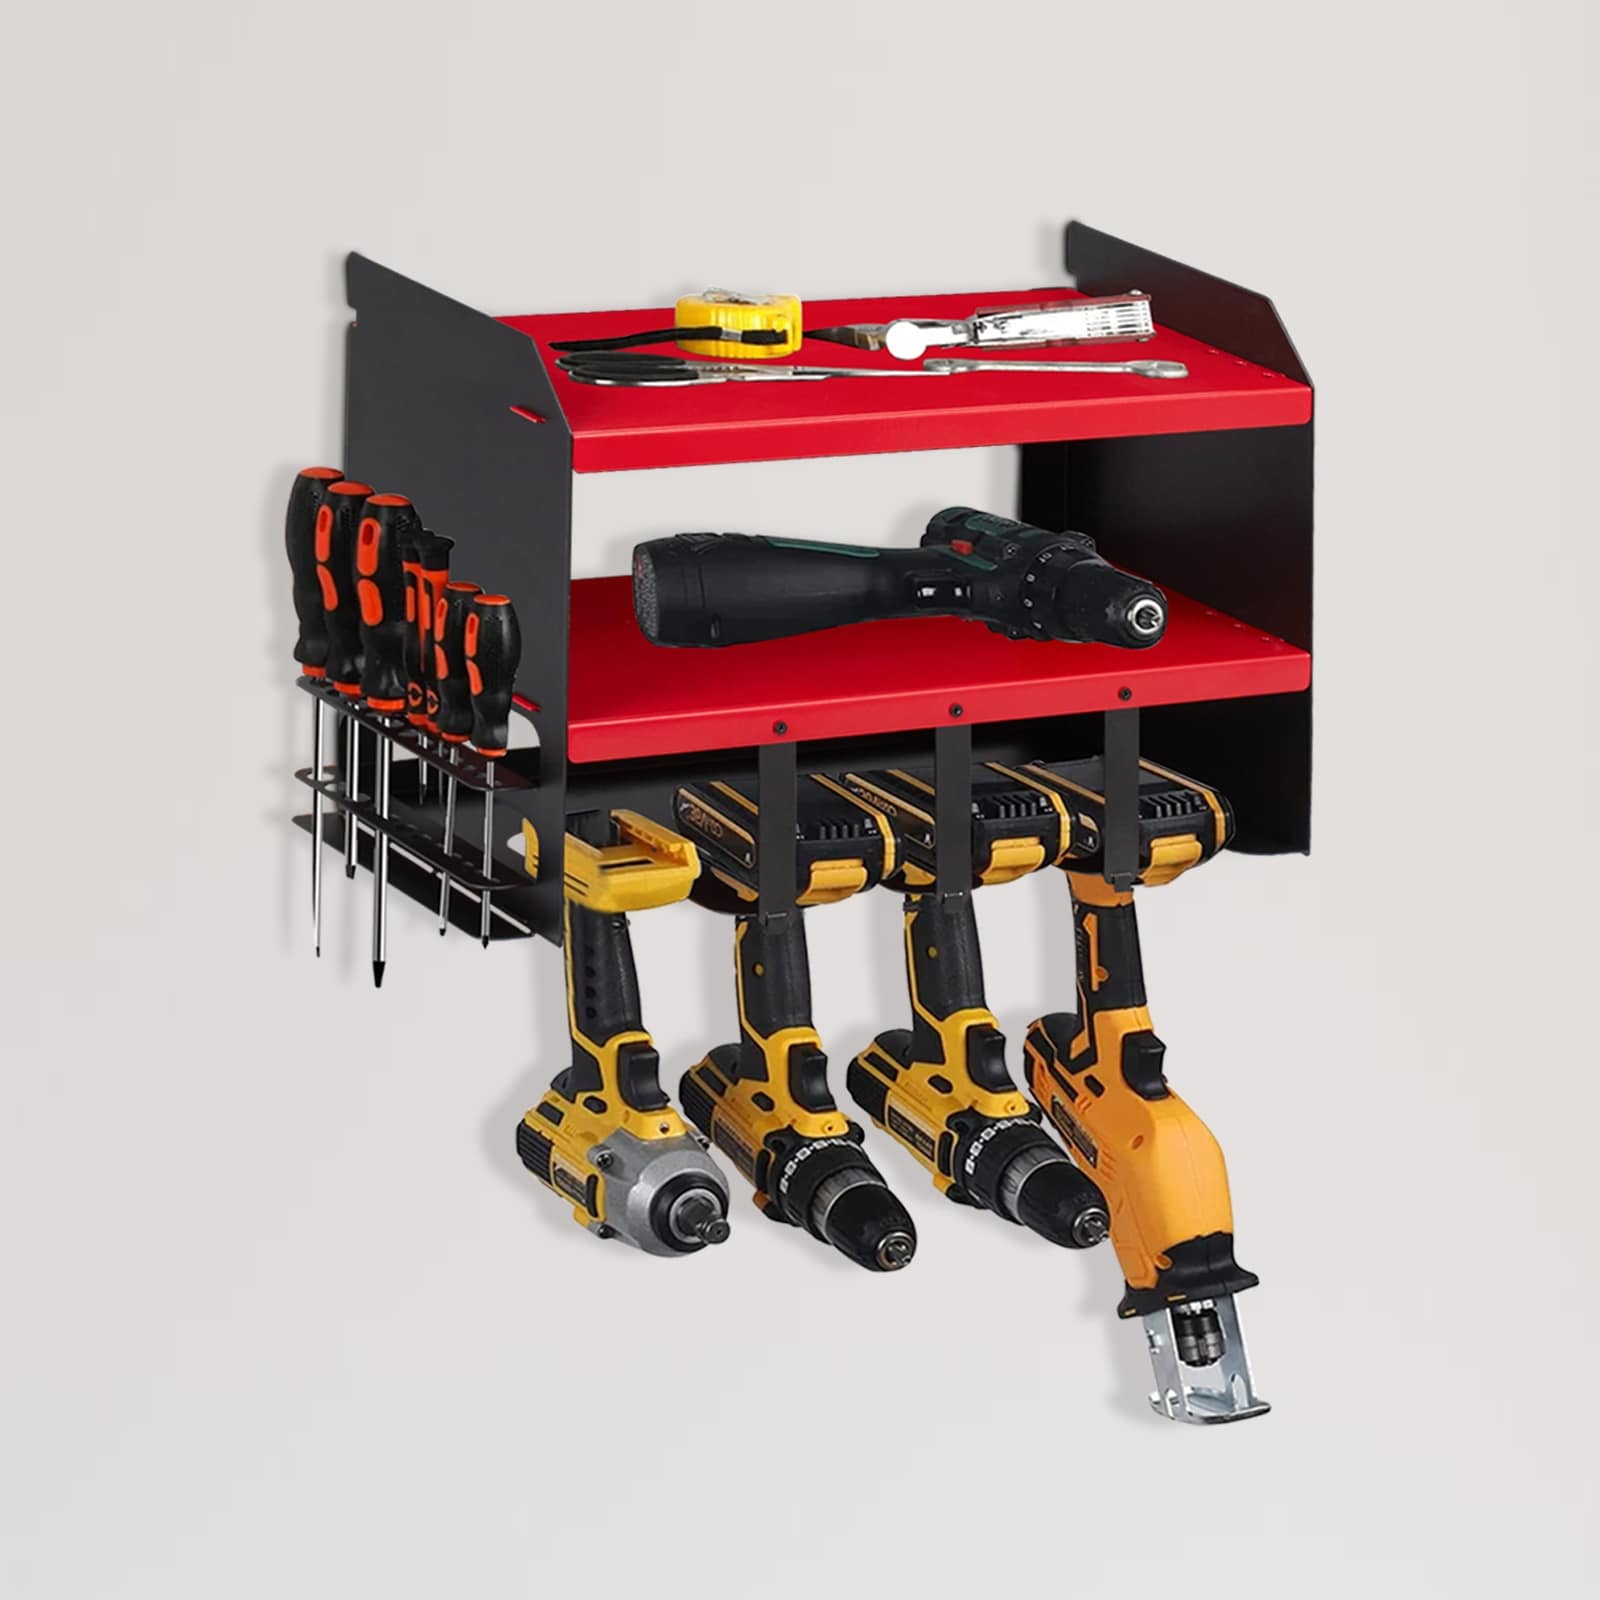 https://ak1.ostkcdn.com/images/products/is/images/direct/da8b561ba02bf6b2af1eed6f8d5d88258025d81f/Power-Tool-Organizer-Wall-Mount%2C-Storage-Tool-Rack-for-Electric-Drill-Charging-Station-for-Garage-and-Workshop.jpg